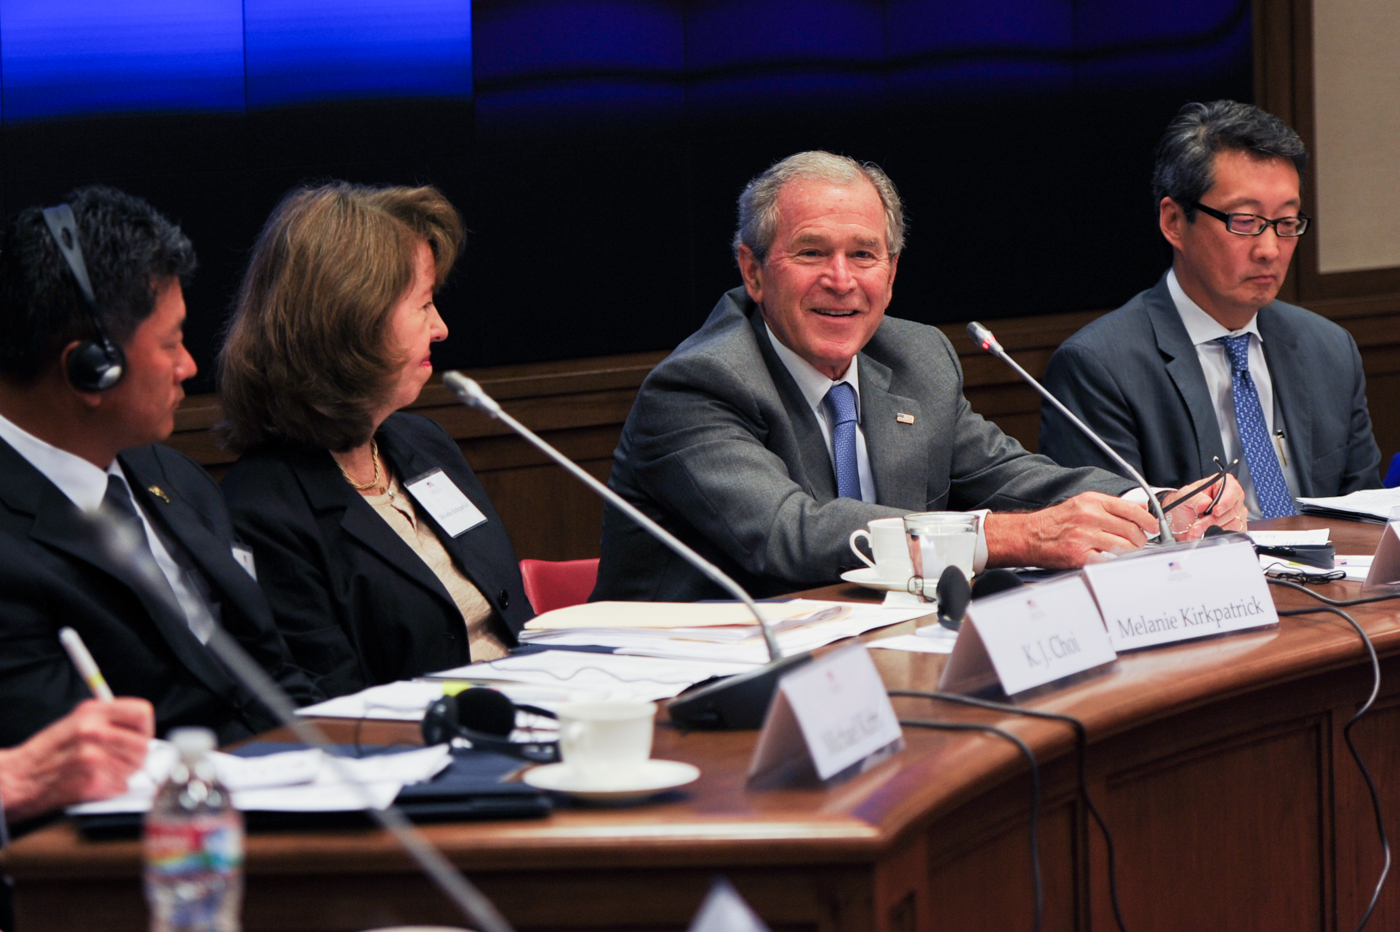 The George W. Bush Presidential Center hosts an event with North Korean Refugees on Oct. 23, 2014. Photo by Grant Miller